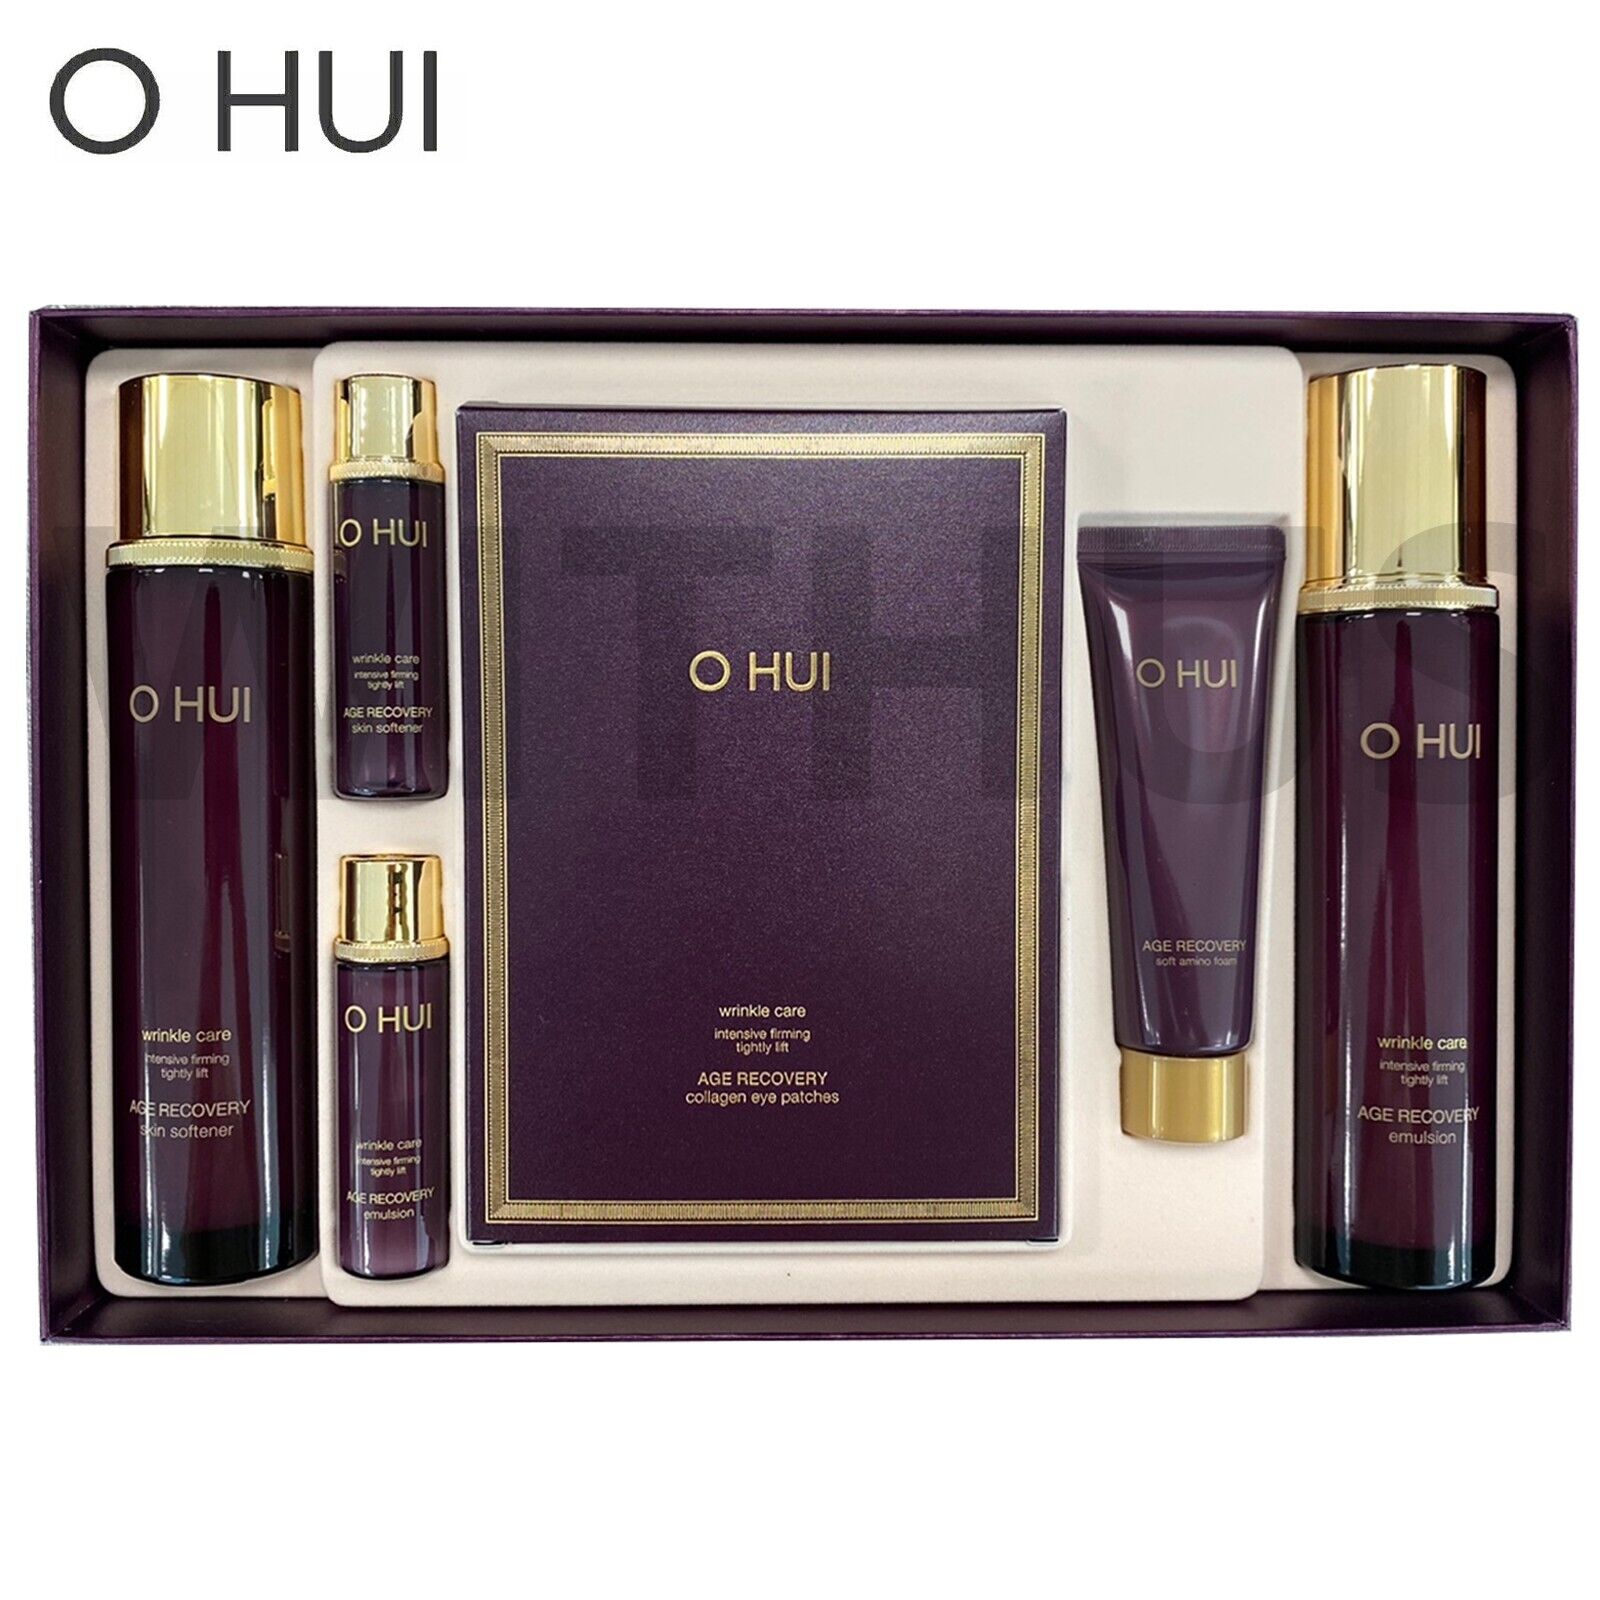 OHUI Age Recovery Special 3-Piece Set